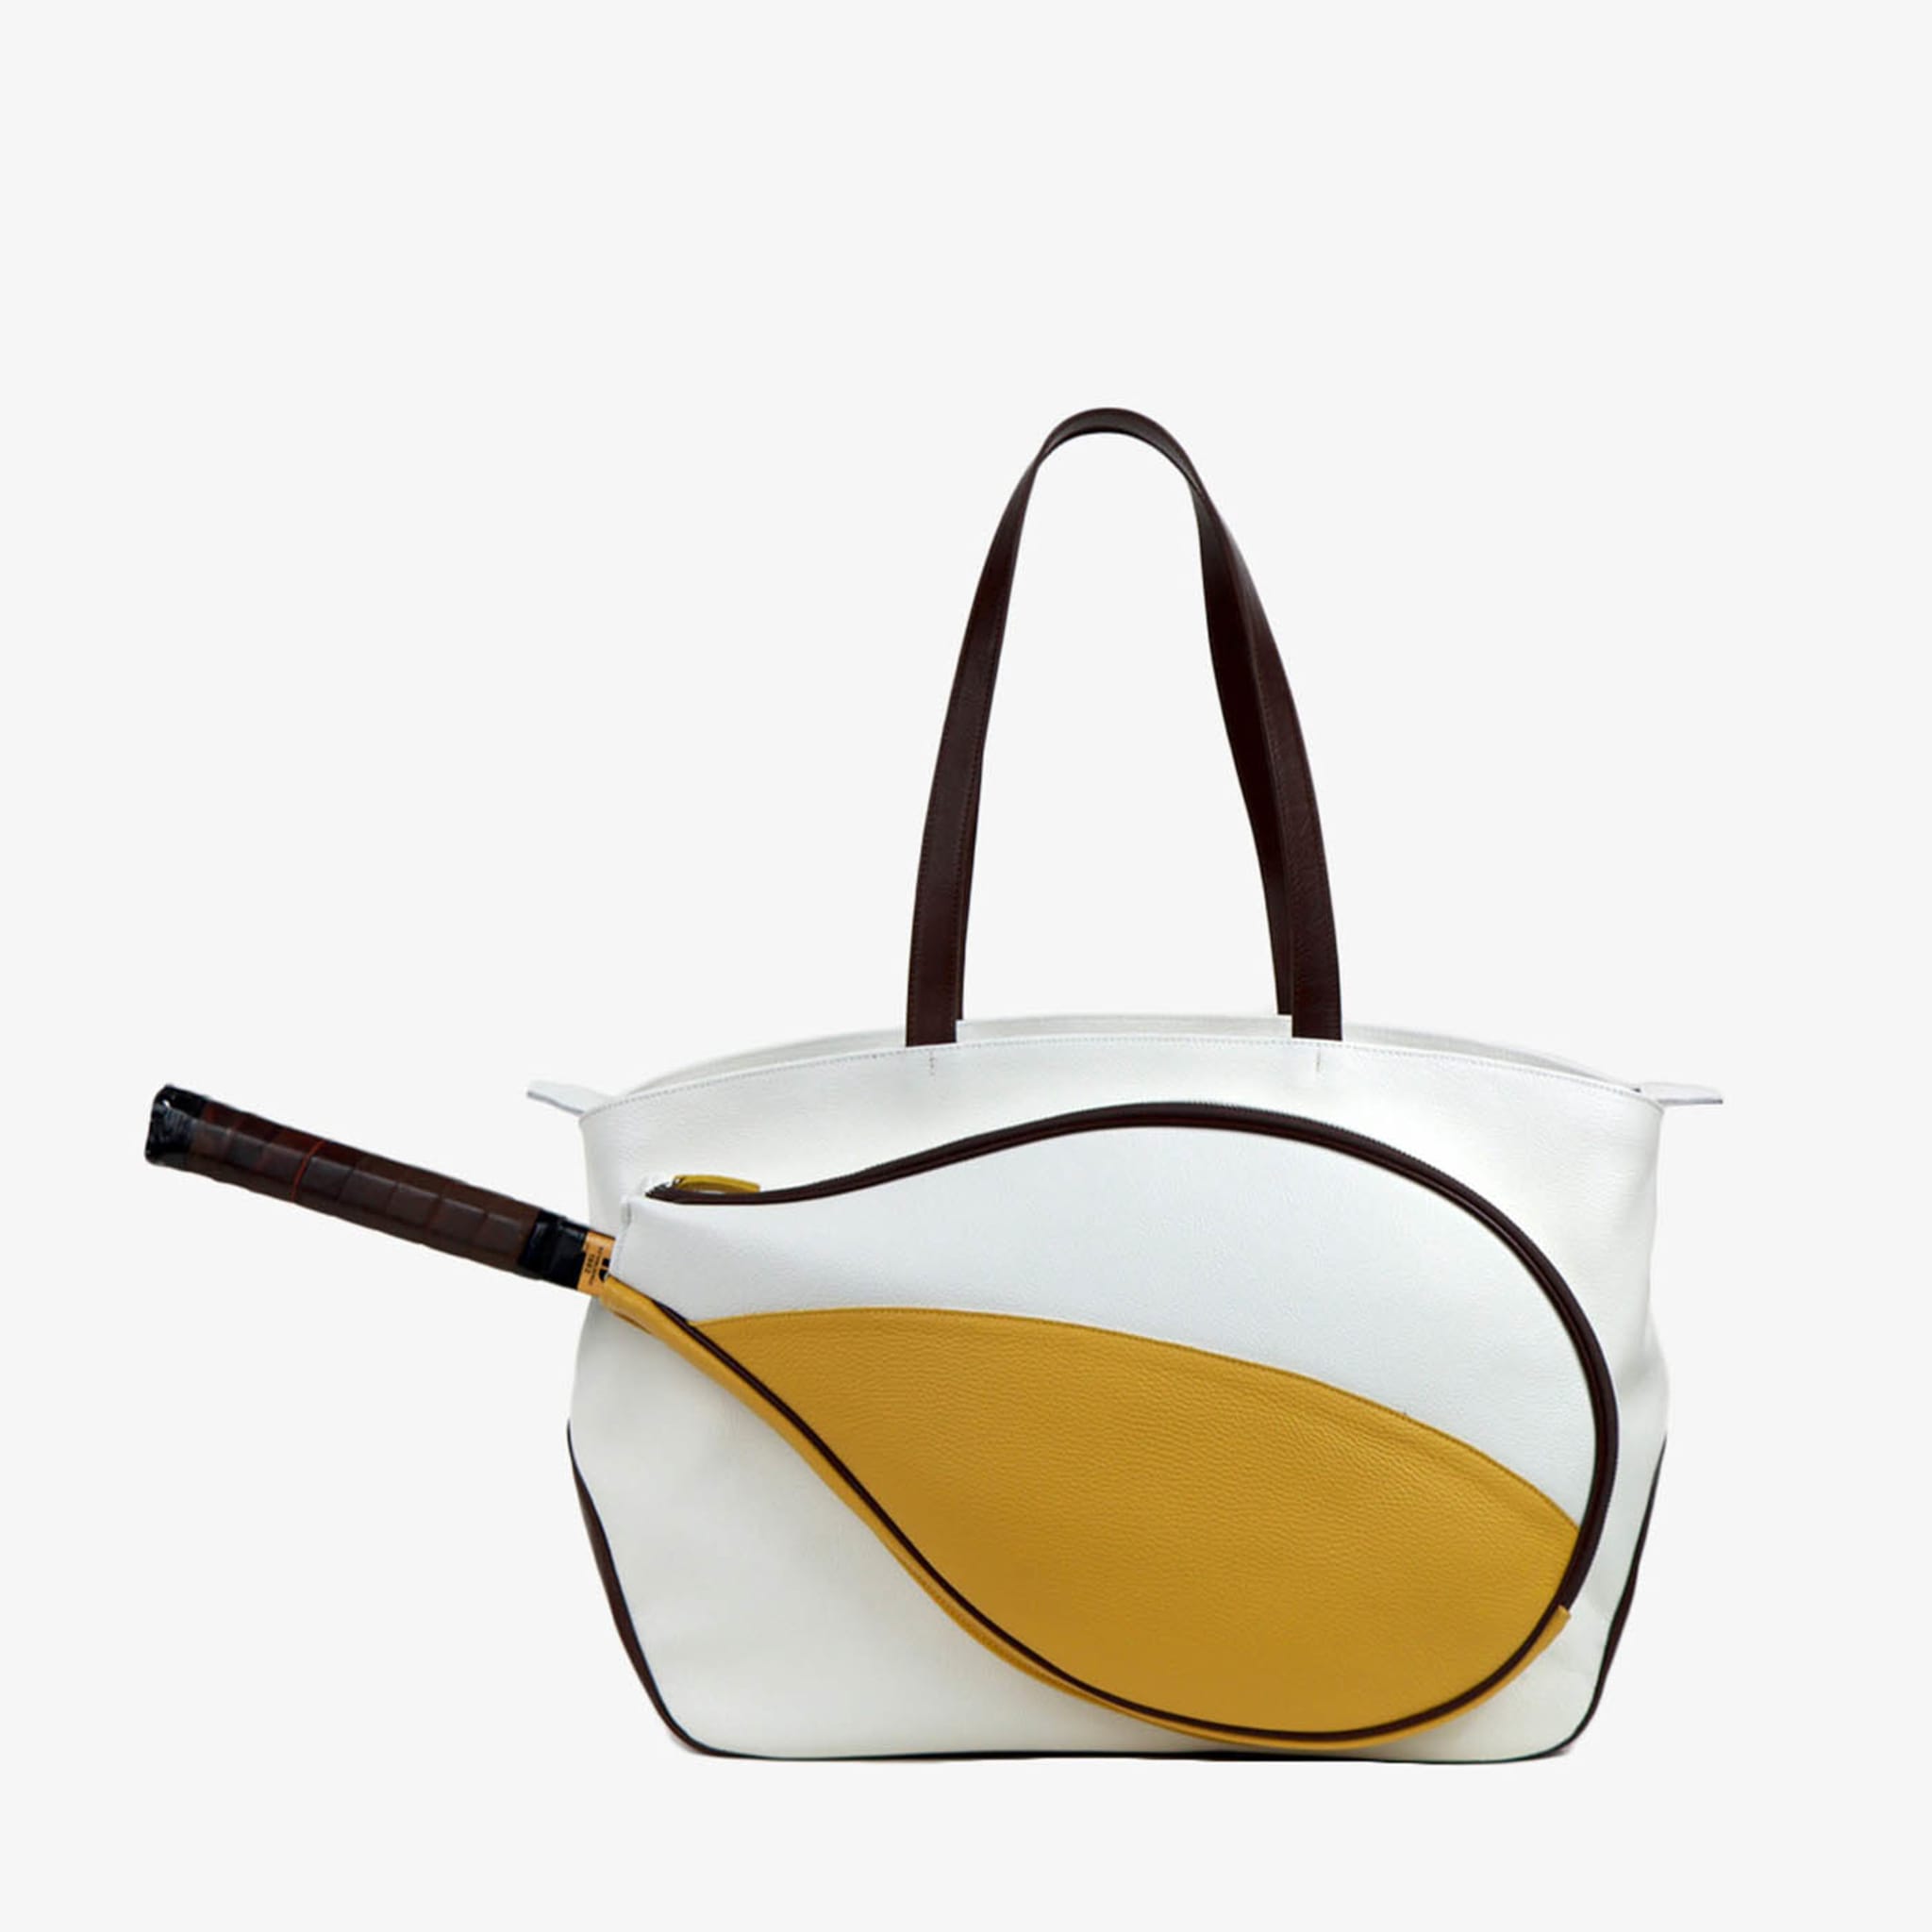 Sport White/Yellow/Brown Bag with Tennis-Racket-Shaped Pocket - Alternative view 2